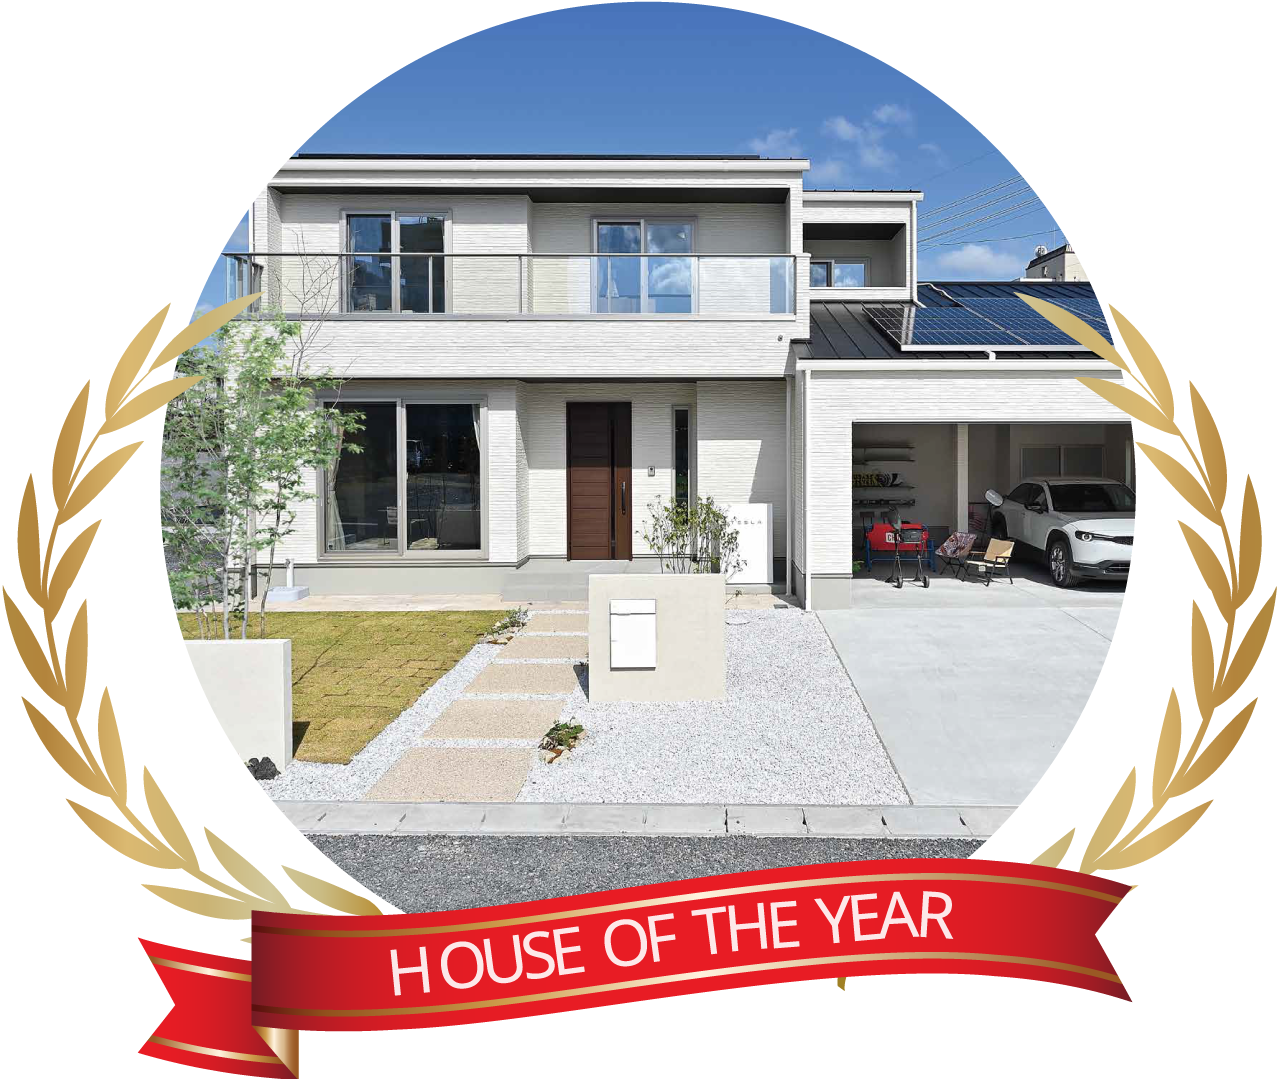 HOUSE OF THE YEAR